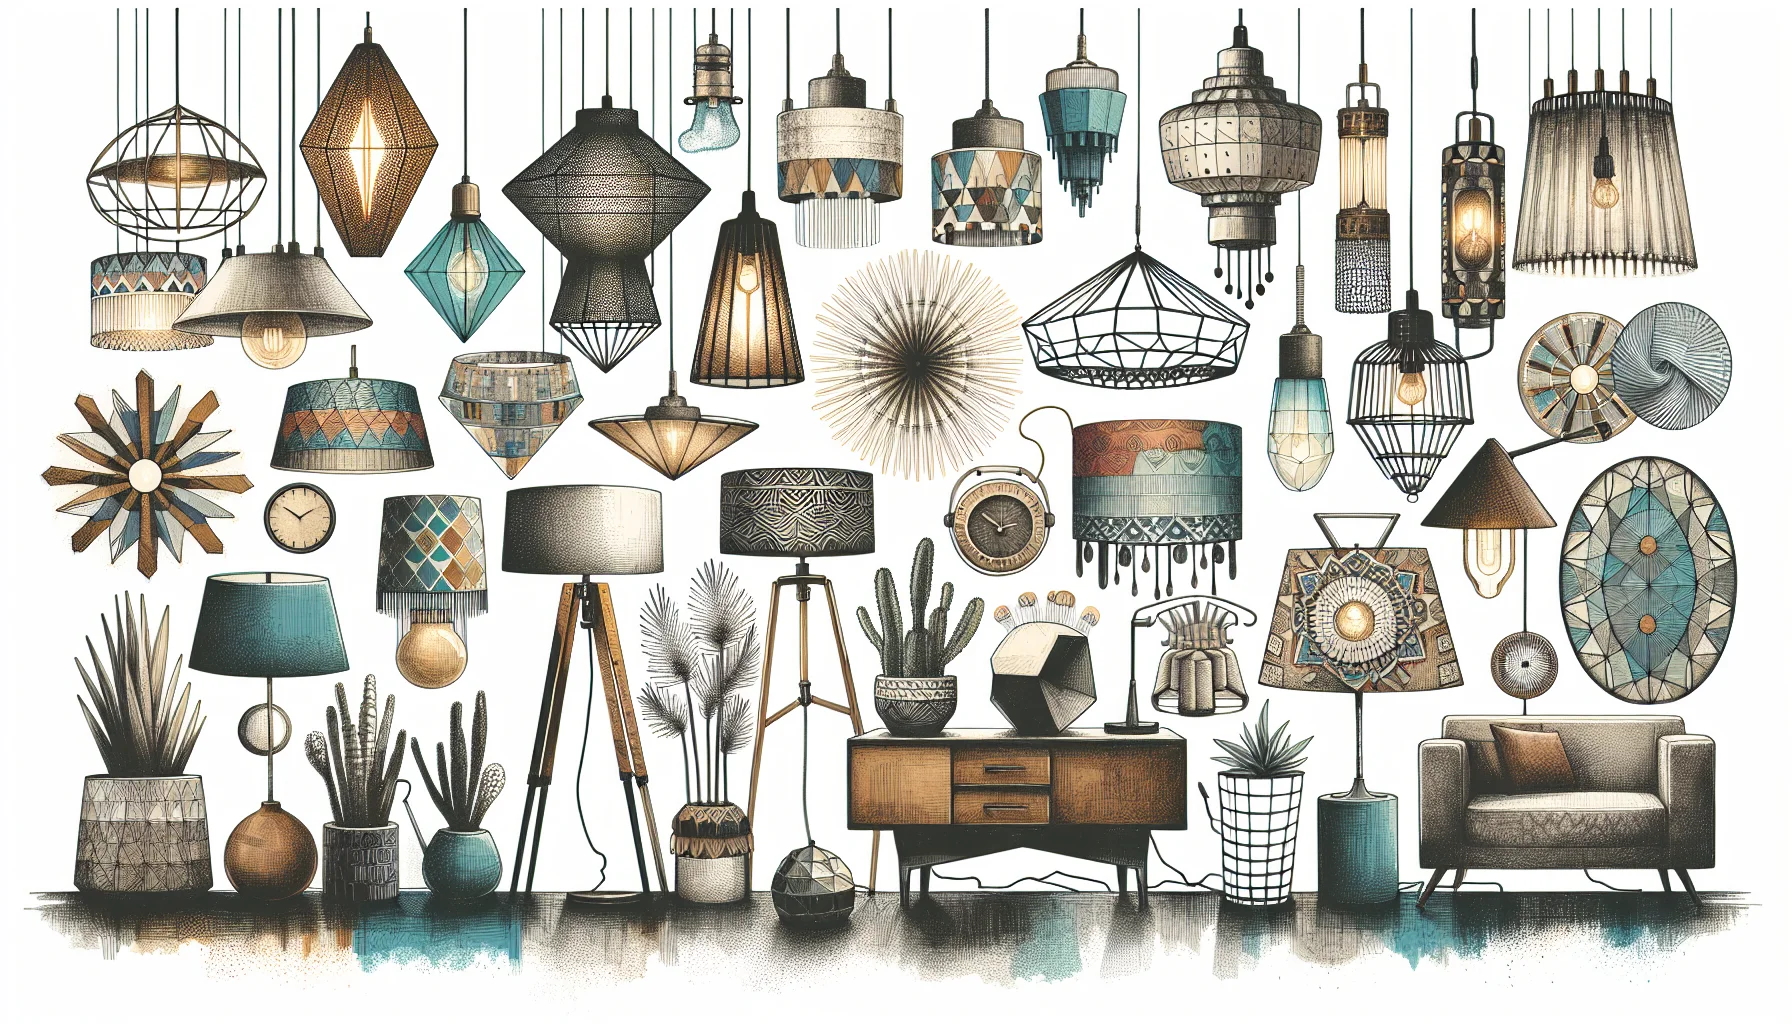 Artistic lighting fixtures and home accessories